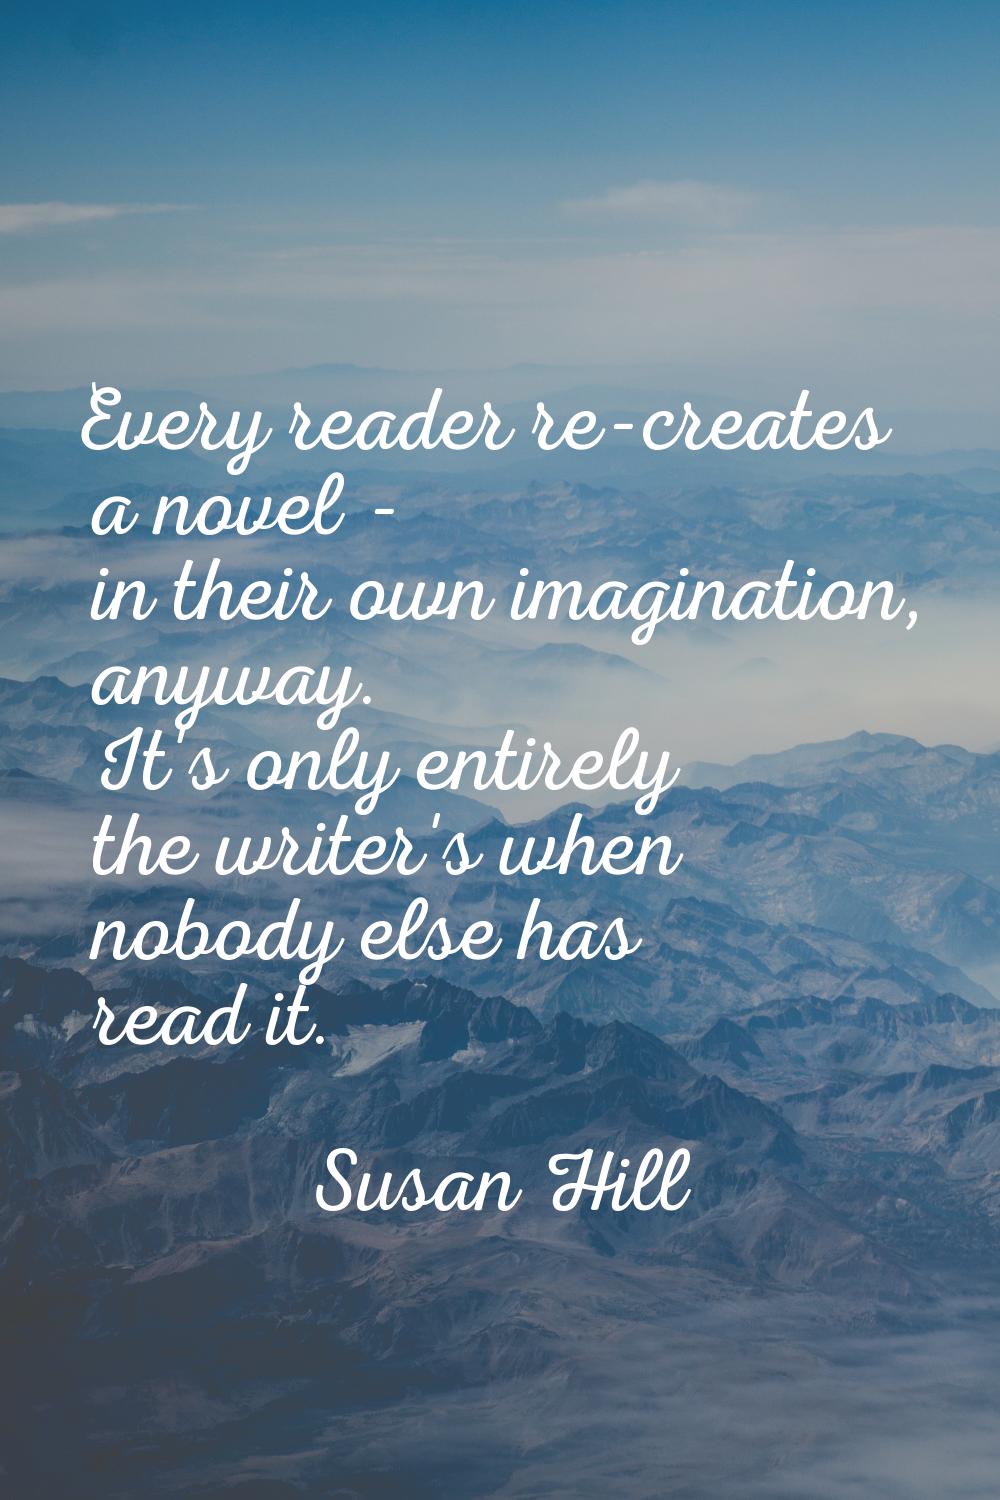 Every reader re-creates a novel - in their own imagination, anyway. It's only entirely the writer's